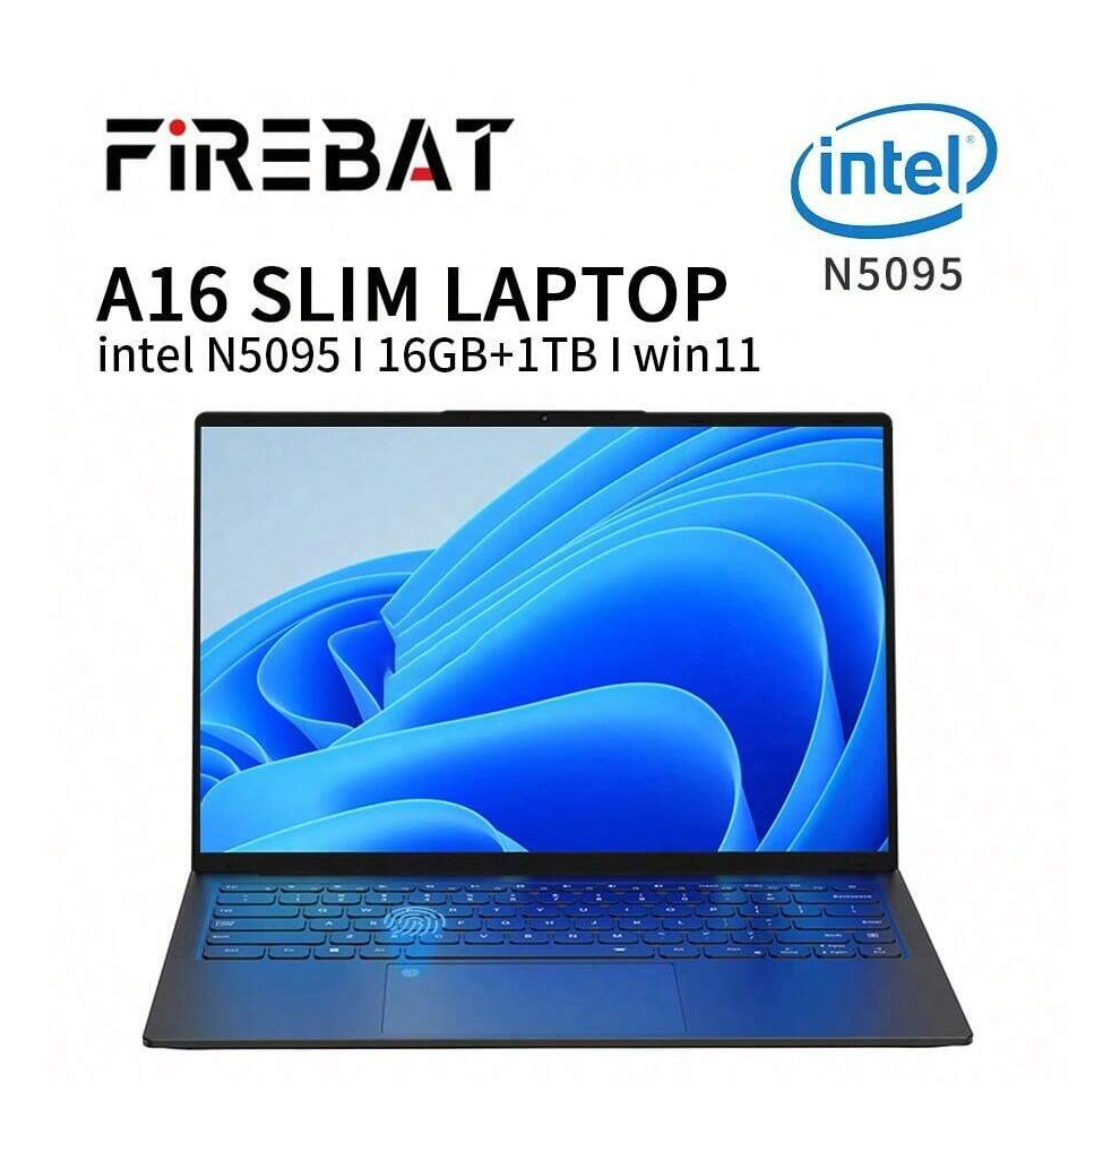 Ignite Your Productivity: Unleash the Power of FIREBAT A16 Laptop with Intel N5095, 16GB RAM, 512GB/1TB SSD, 16-inch FHD IPS Display, Fingerprint Recognition, and Dual Band WiFi!